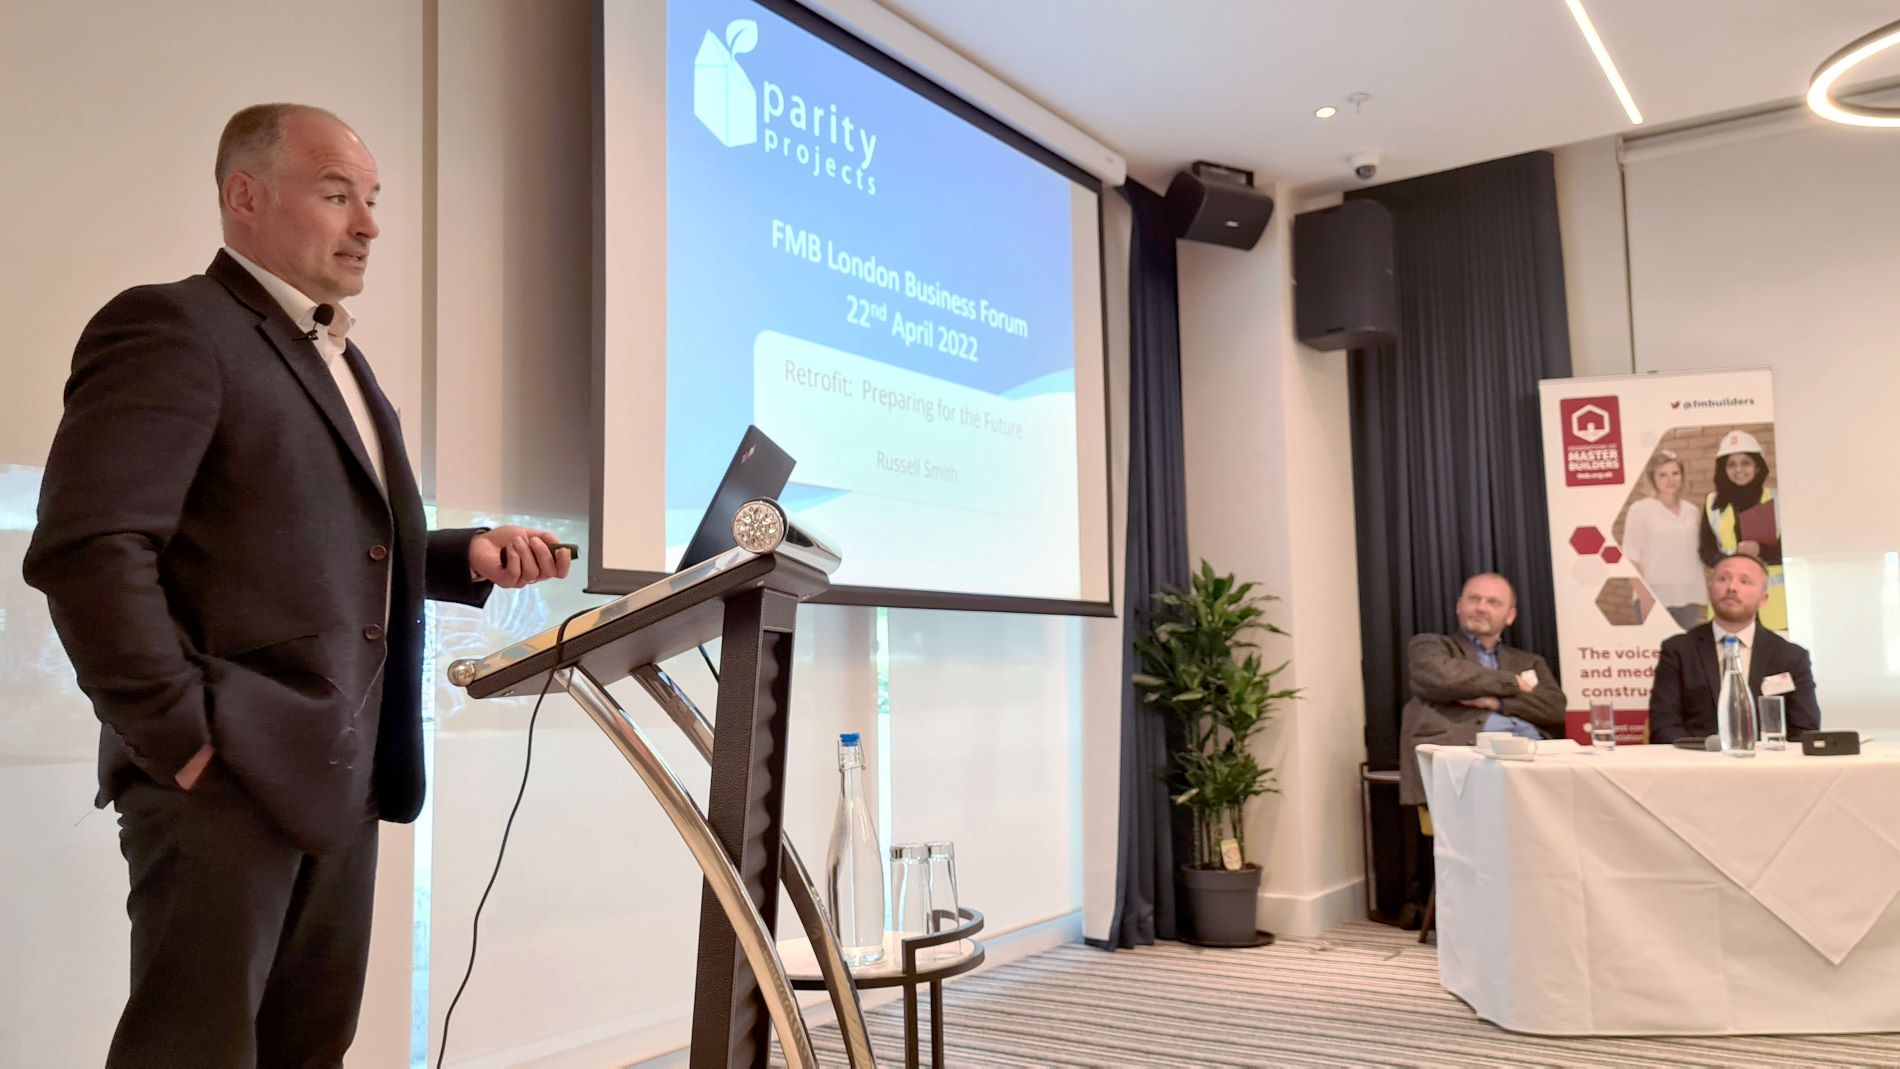 Russell Smith of Parity Projects talks at the FMB's London Business Forum